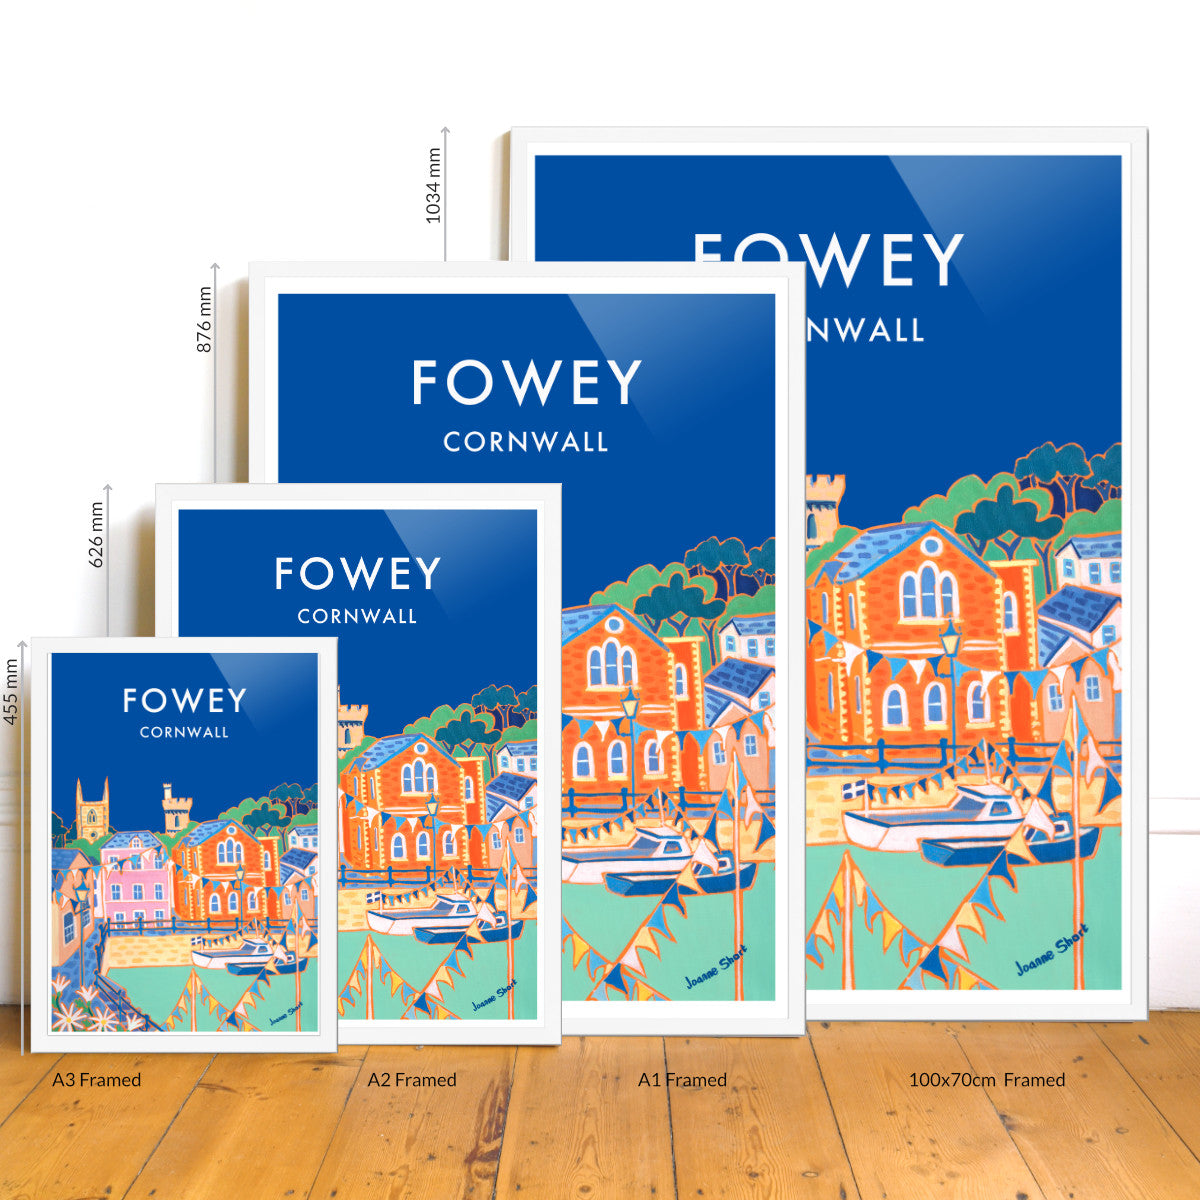 Vintage Style Travel Poster by Joanne Short of Fowey Harbour in Cornwall